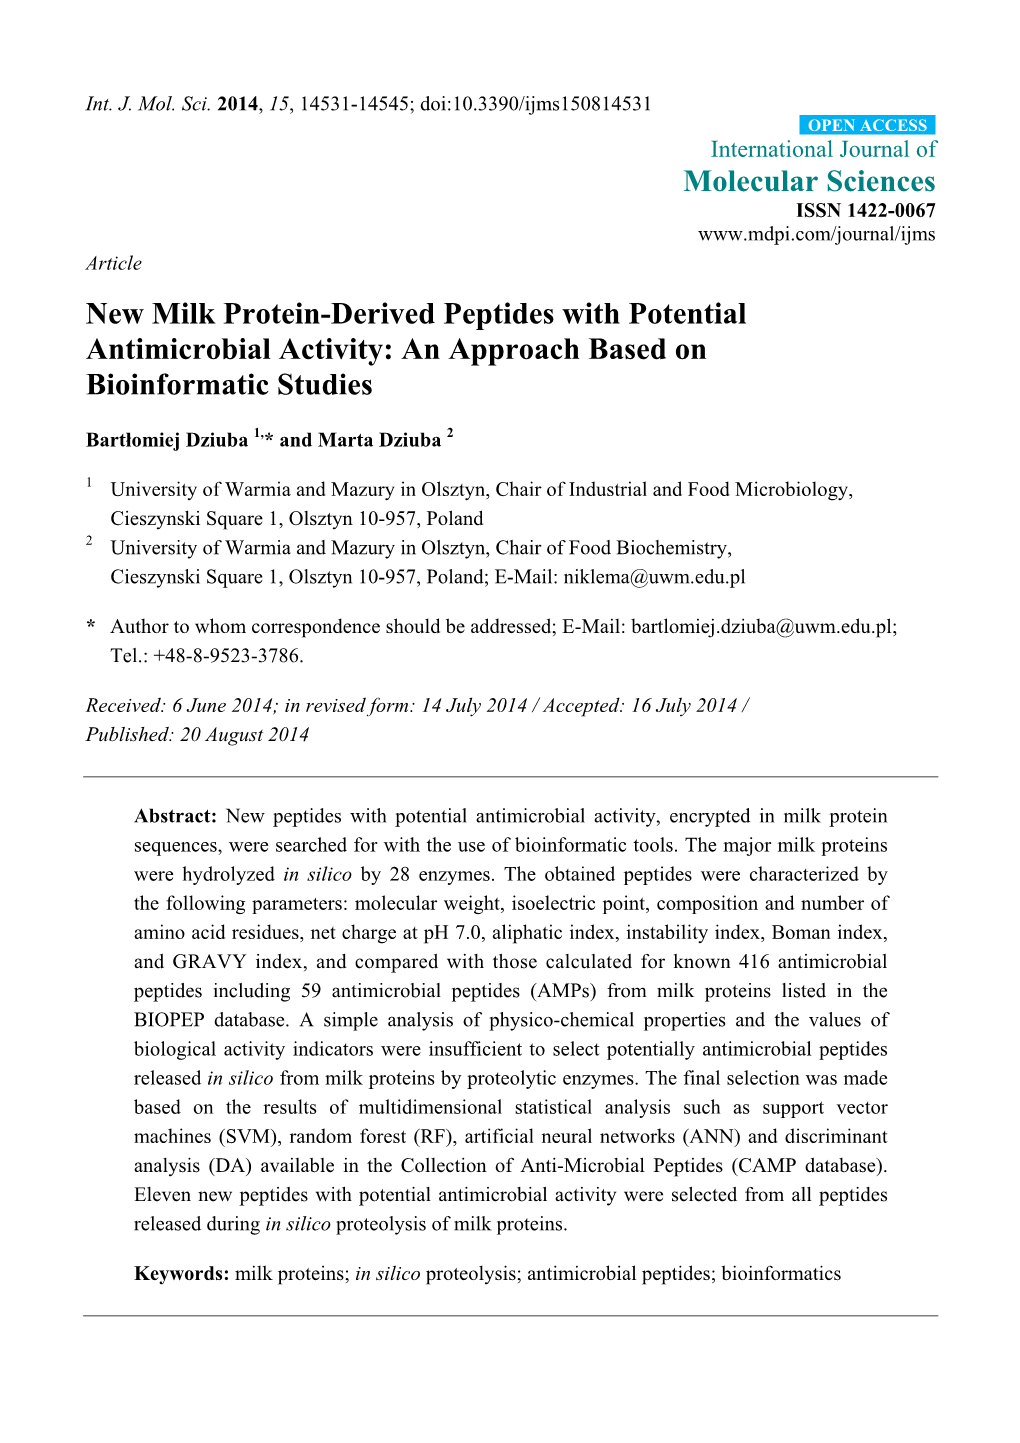 New Milk Protein-Derived Peptides with Potential Antimicrobial Activity: an Approach Based on Bioinformatic Studies